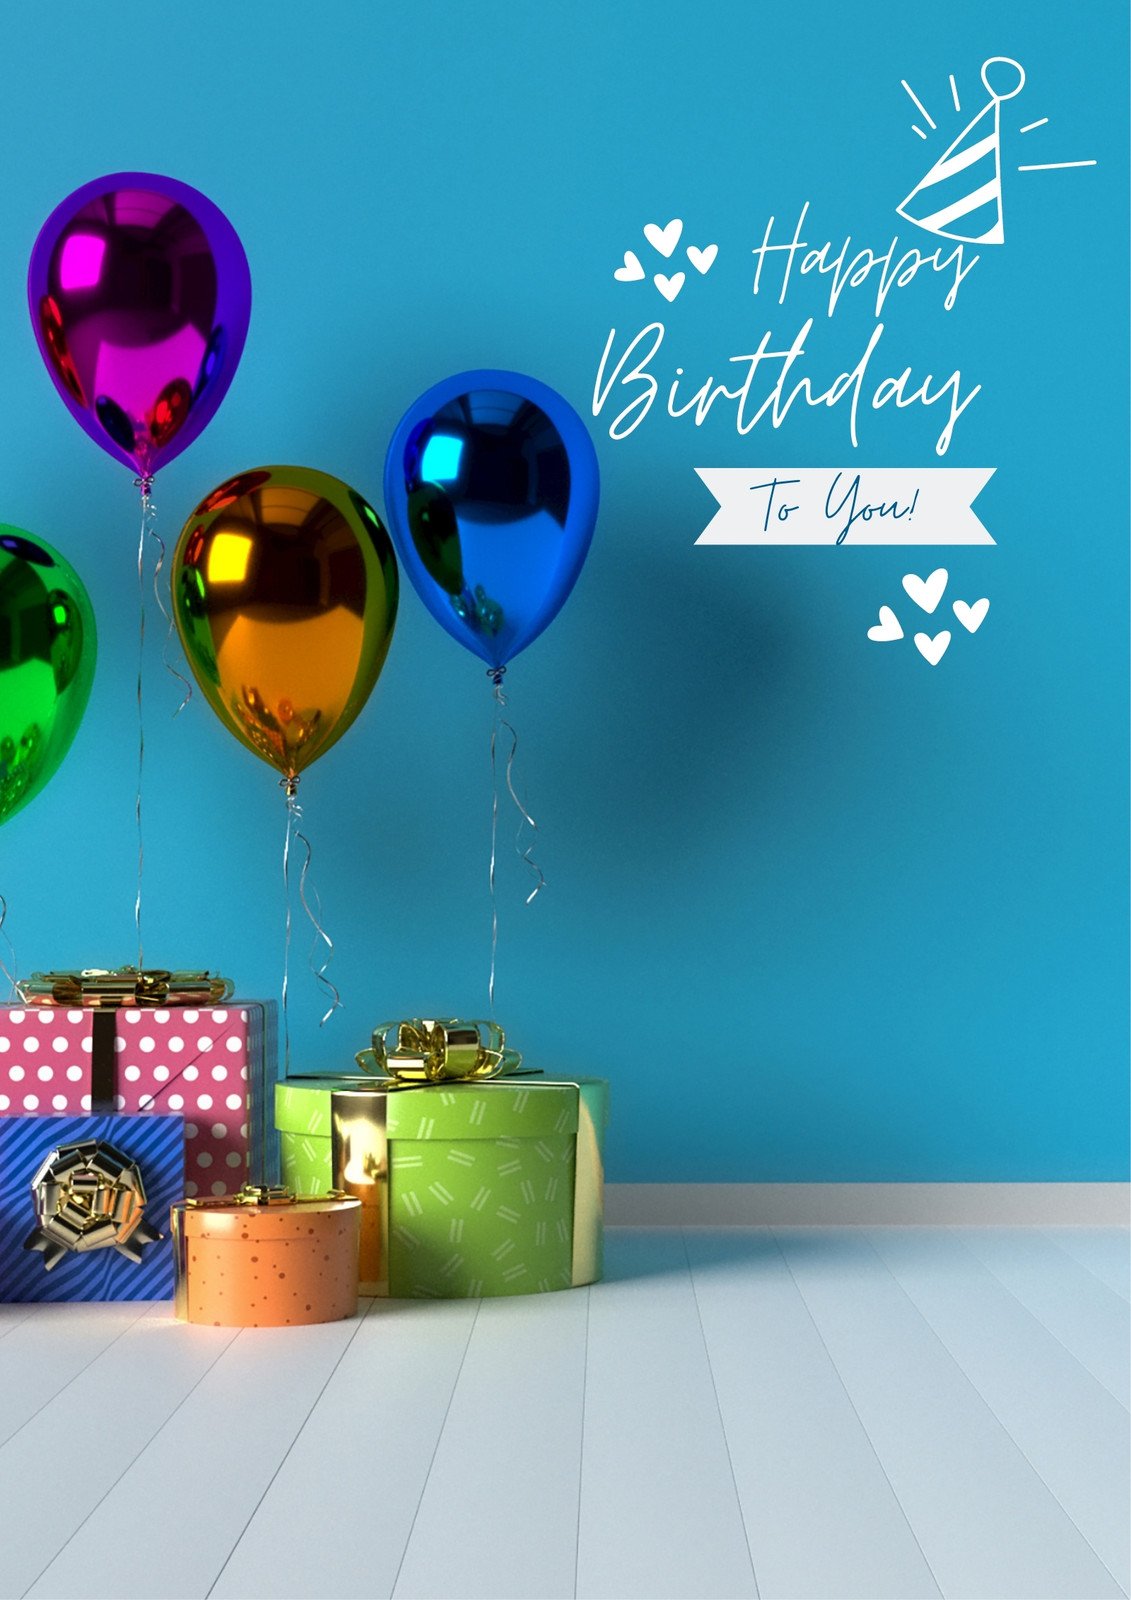 Free and fun birthday poster templates to customize  Canva